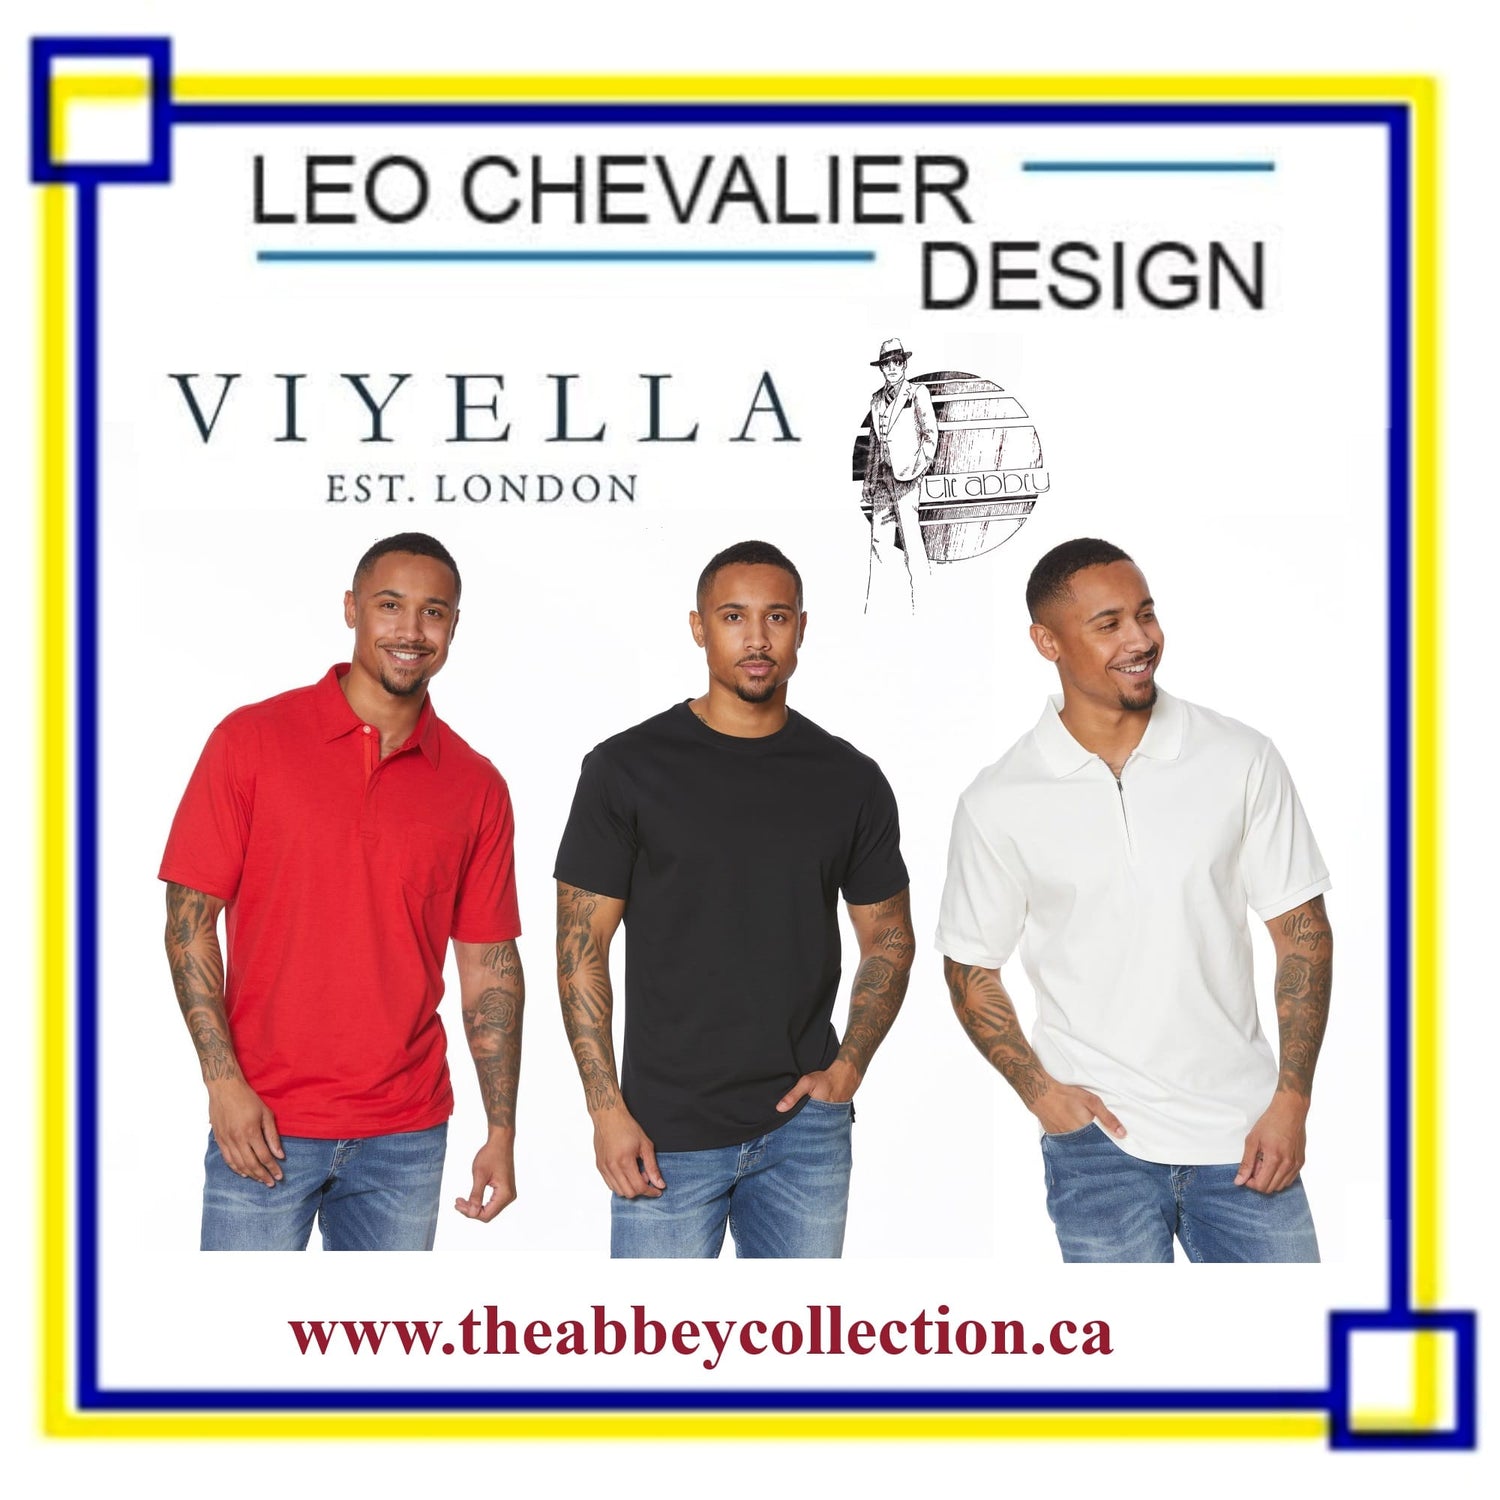 Polo, Golf  and T-Shirts by Leo Chevalier, Viyella